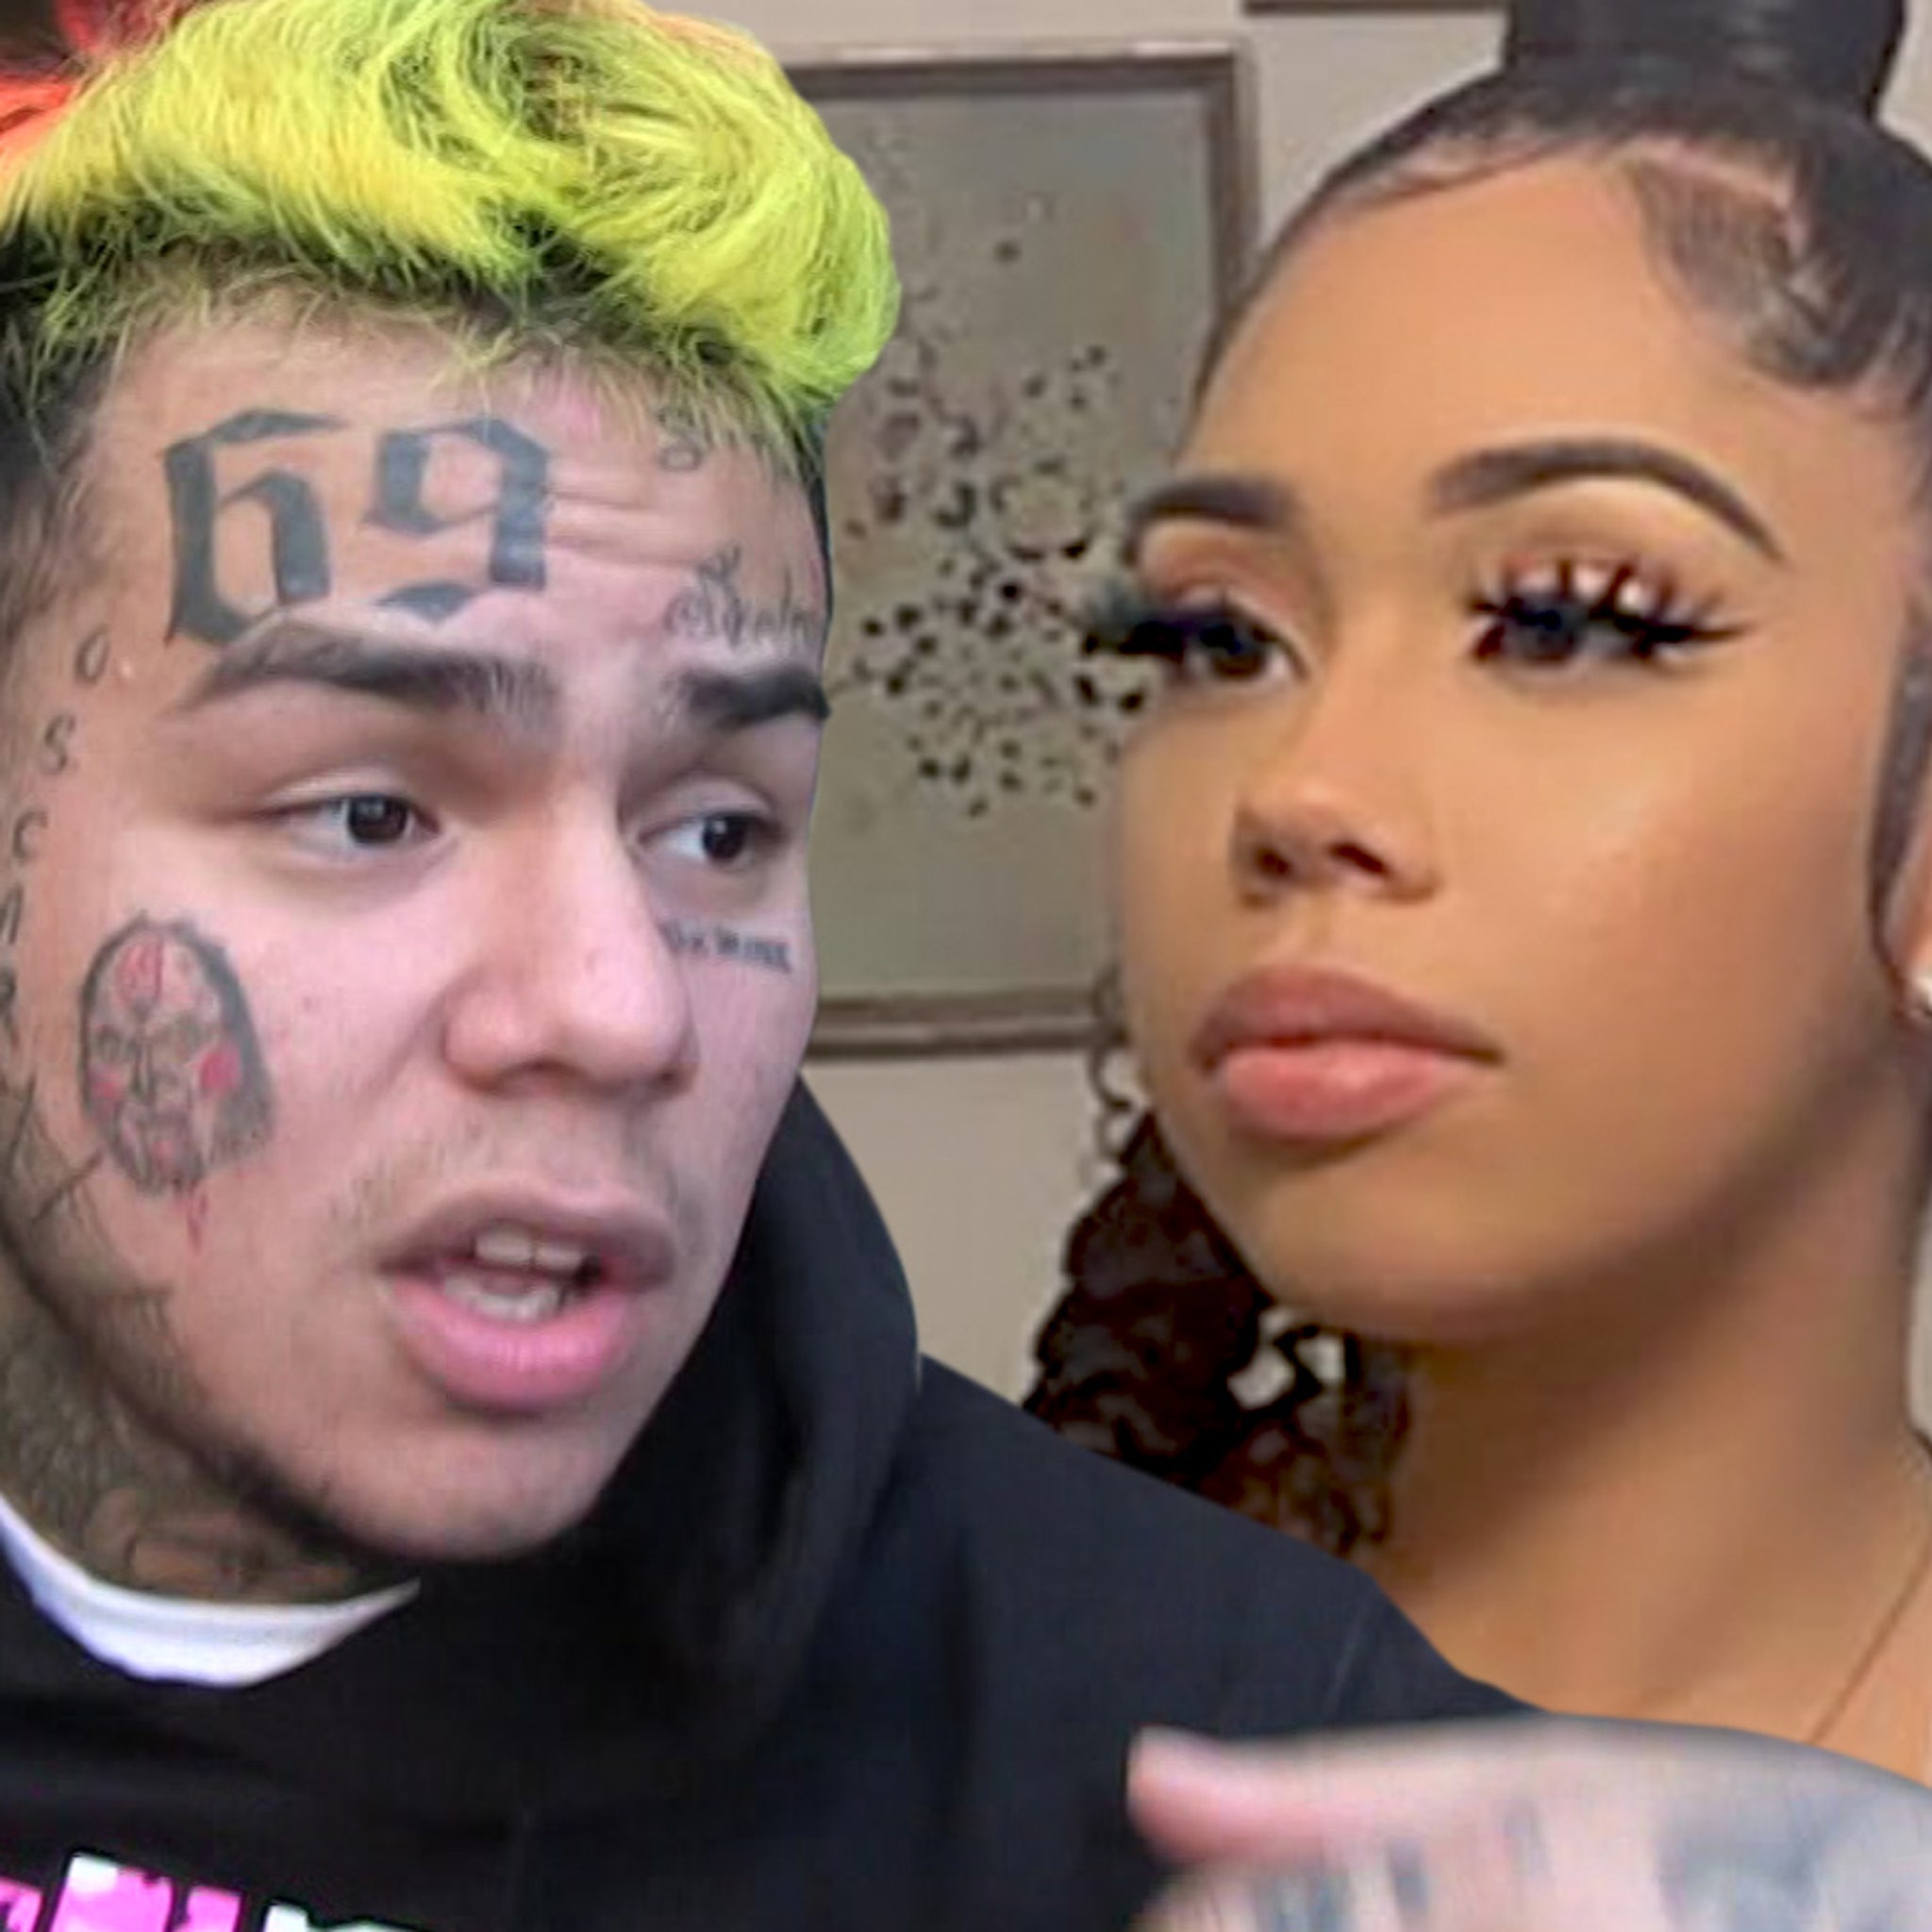 6ix9ine Accused Of Being Absentee Dad Upon Release He Blames Covid 19